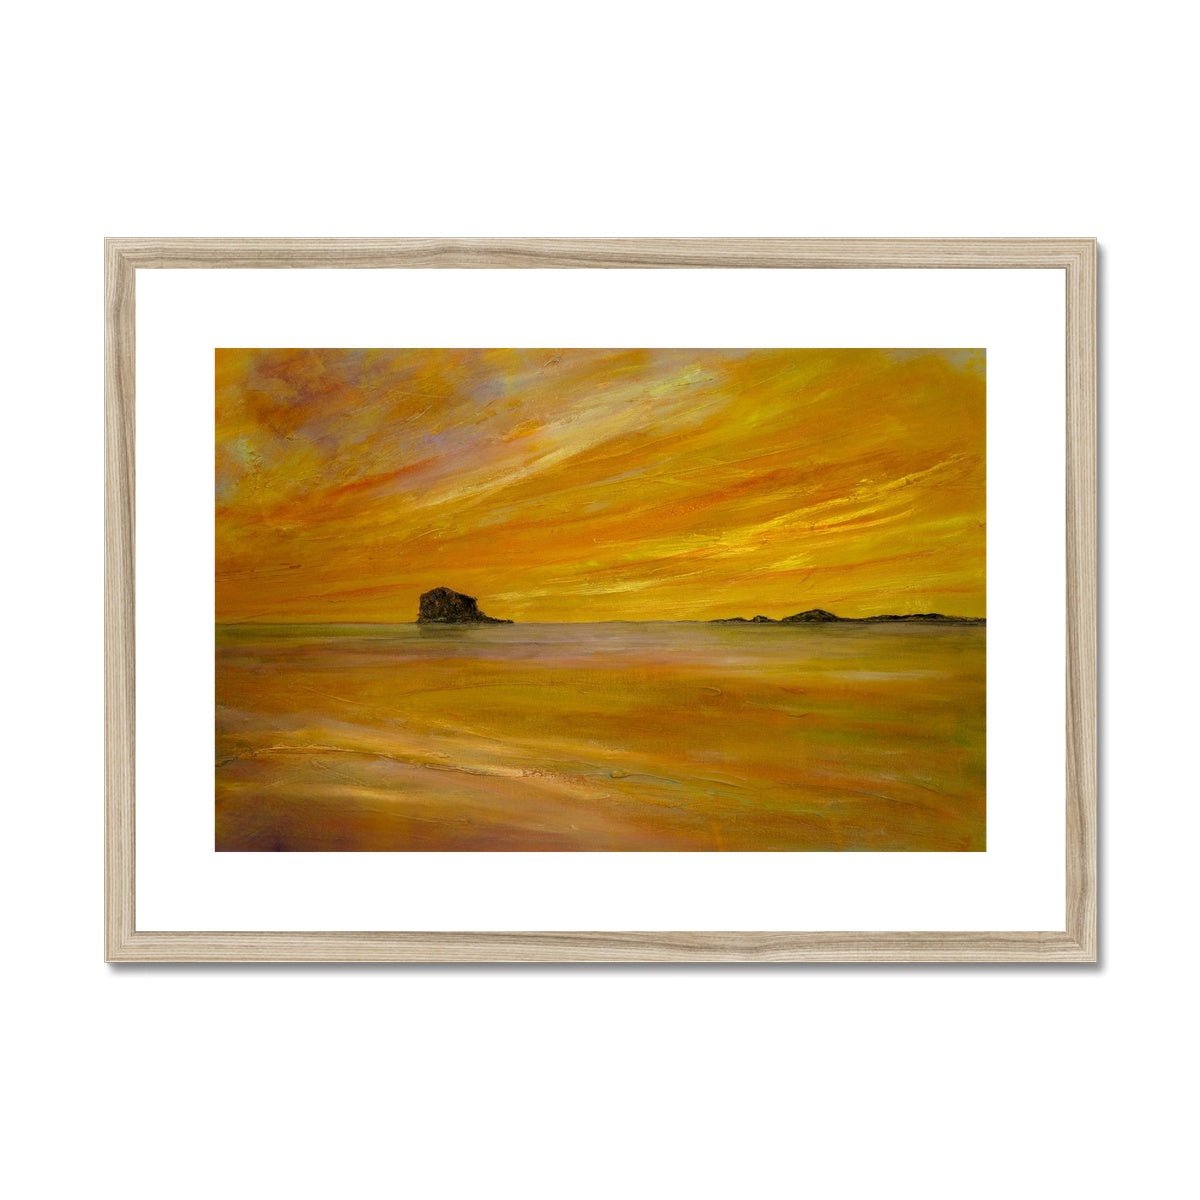 Bass Rock Dusk Painting | Framed & Mounted Prints From Scotland-Framed & Mounted Prints-Edinburgh & Glasgow Art Gallery-A2 Landscape-Natural Frame-Paintings, Prints, Homeware, Art Gifts From Scotland By Scottish Artist Kevin Hunter